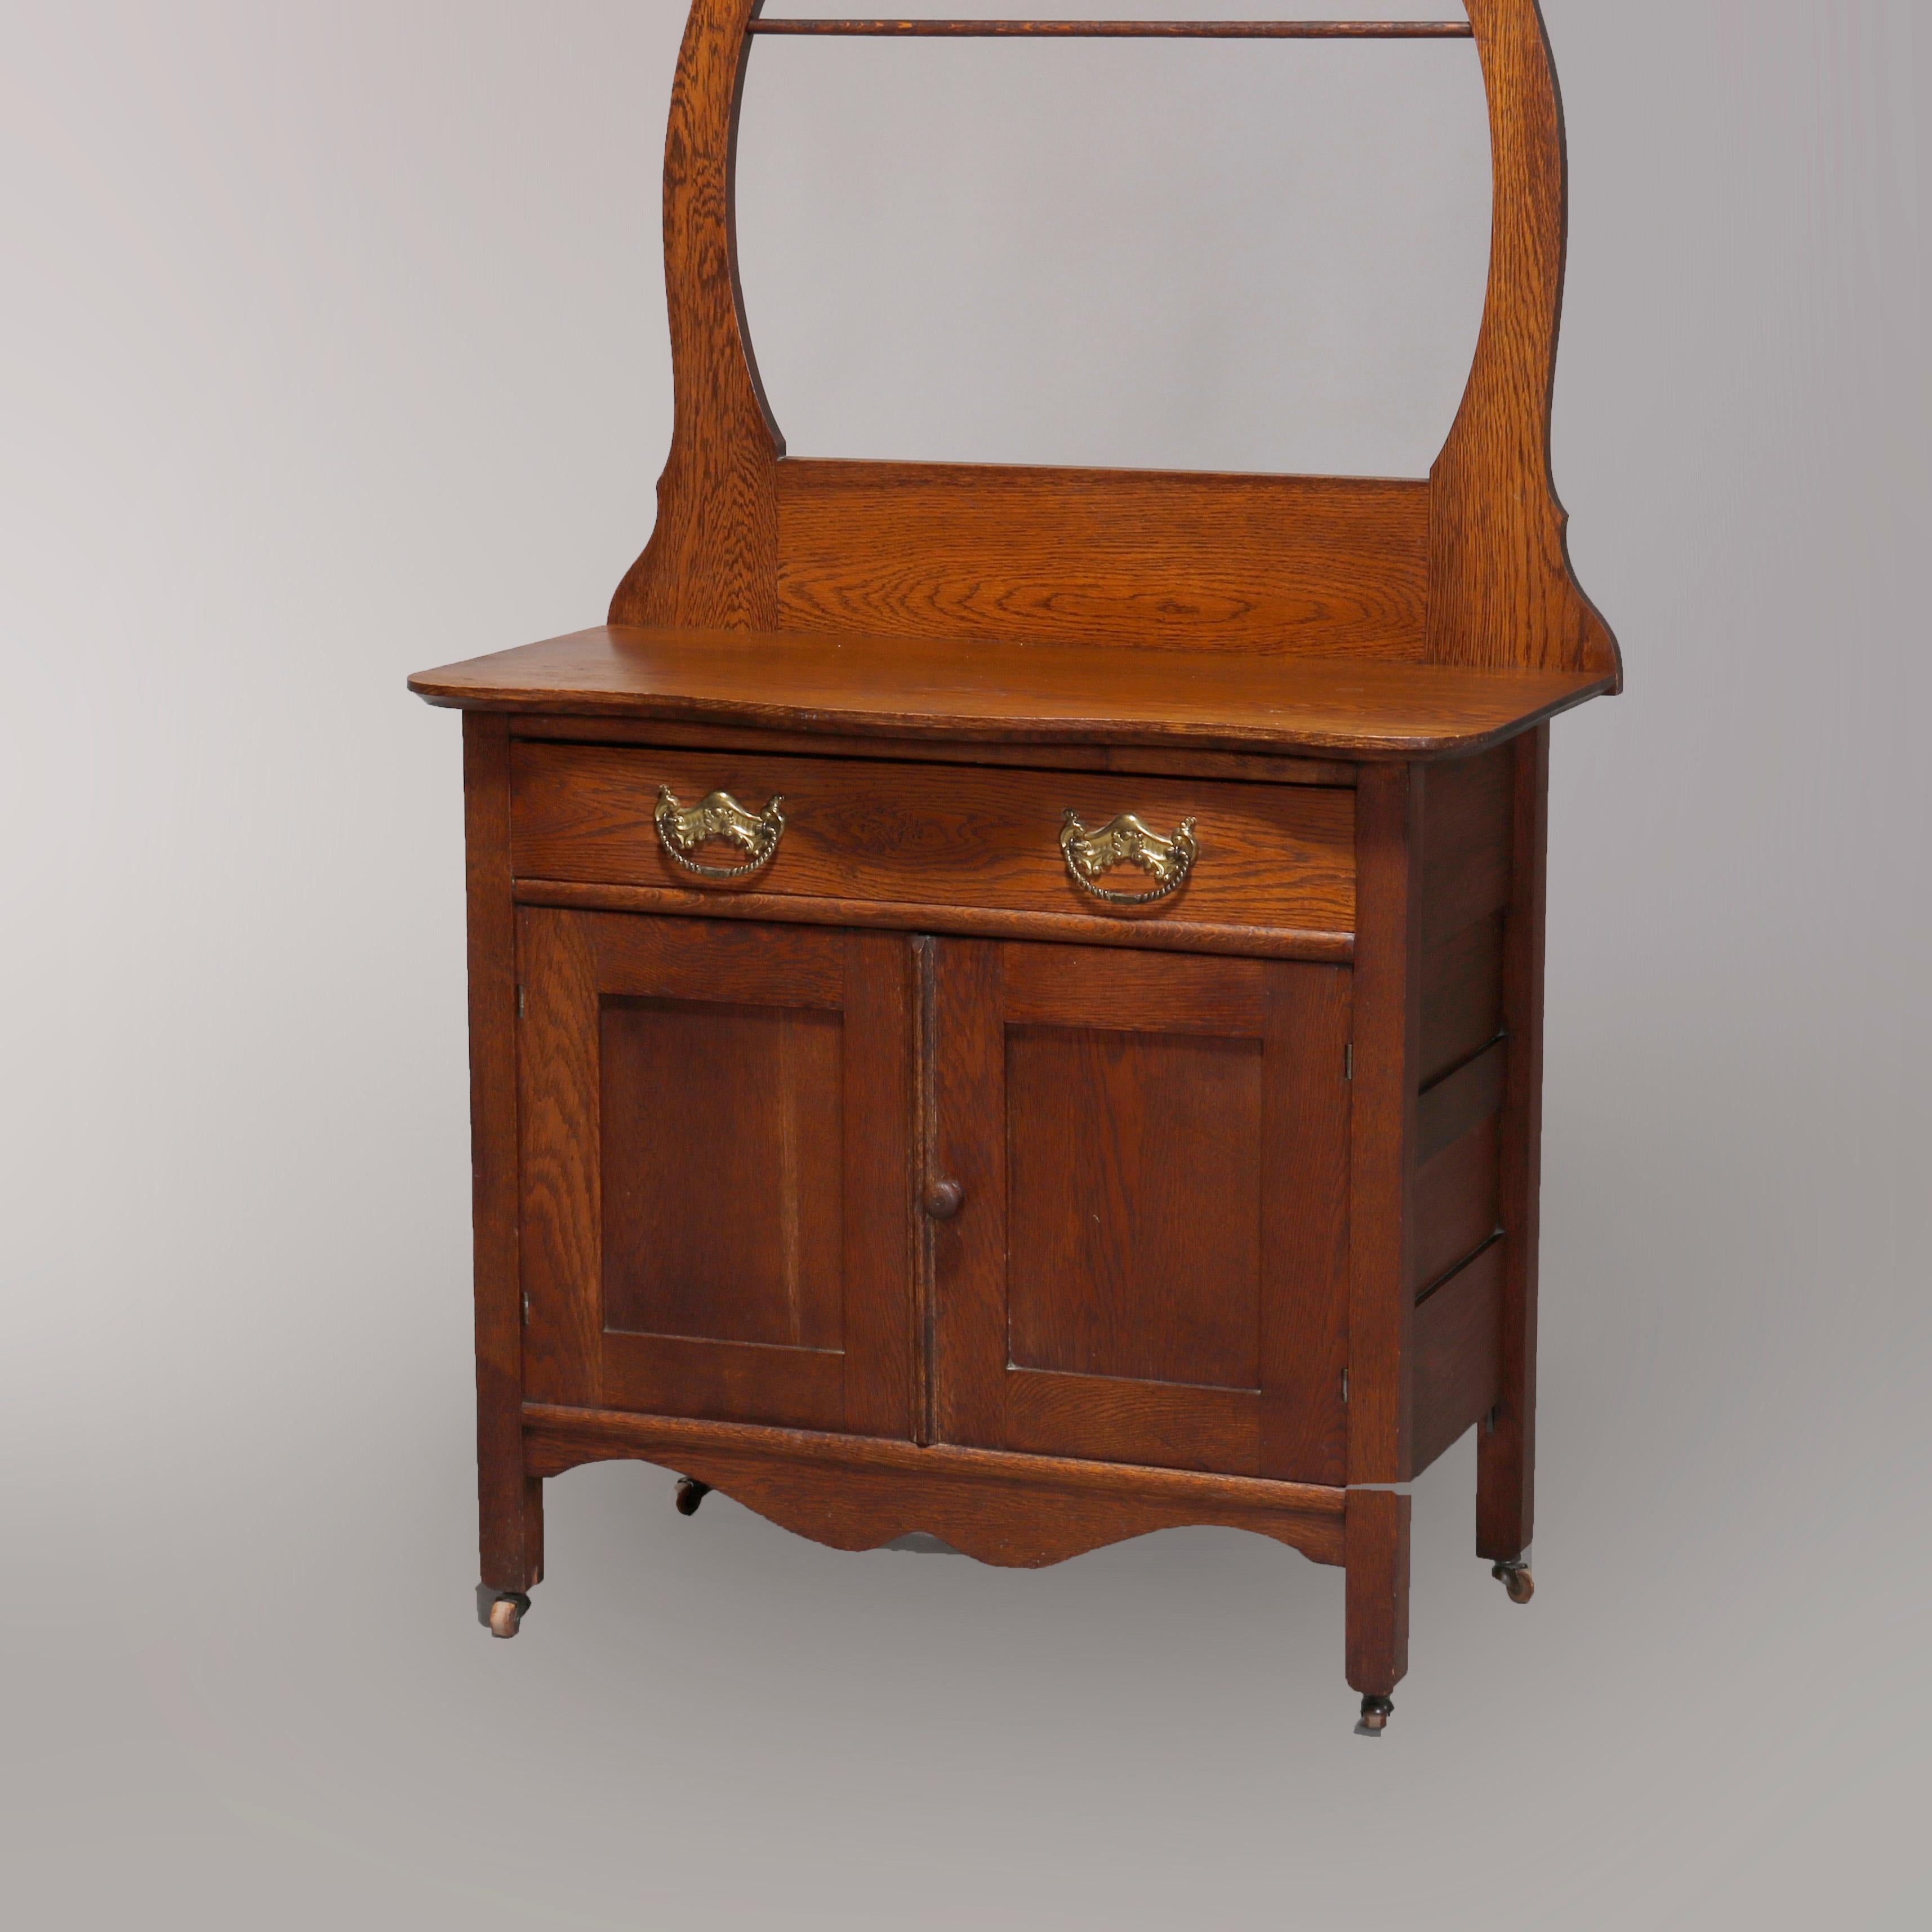 An antique Victorian Hotel Commode by Muncy Mfg. offers oak construction with upper mirror having carved scroll crest and surmounting case with linen bar and shaped top over frieze drawer and double door cabinet, en verso original labels as